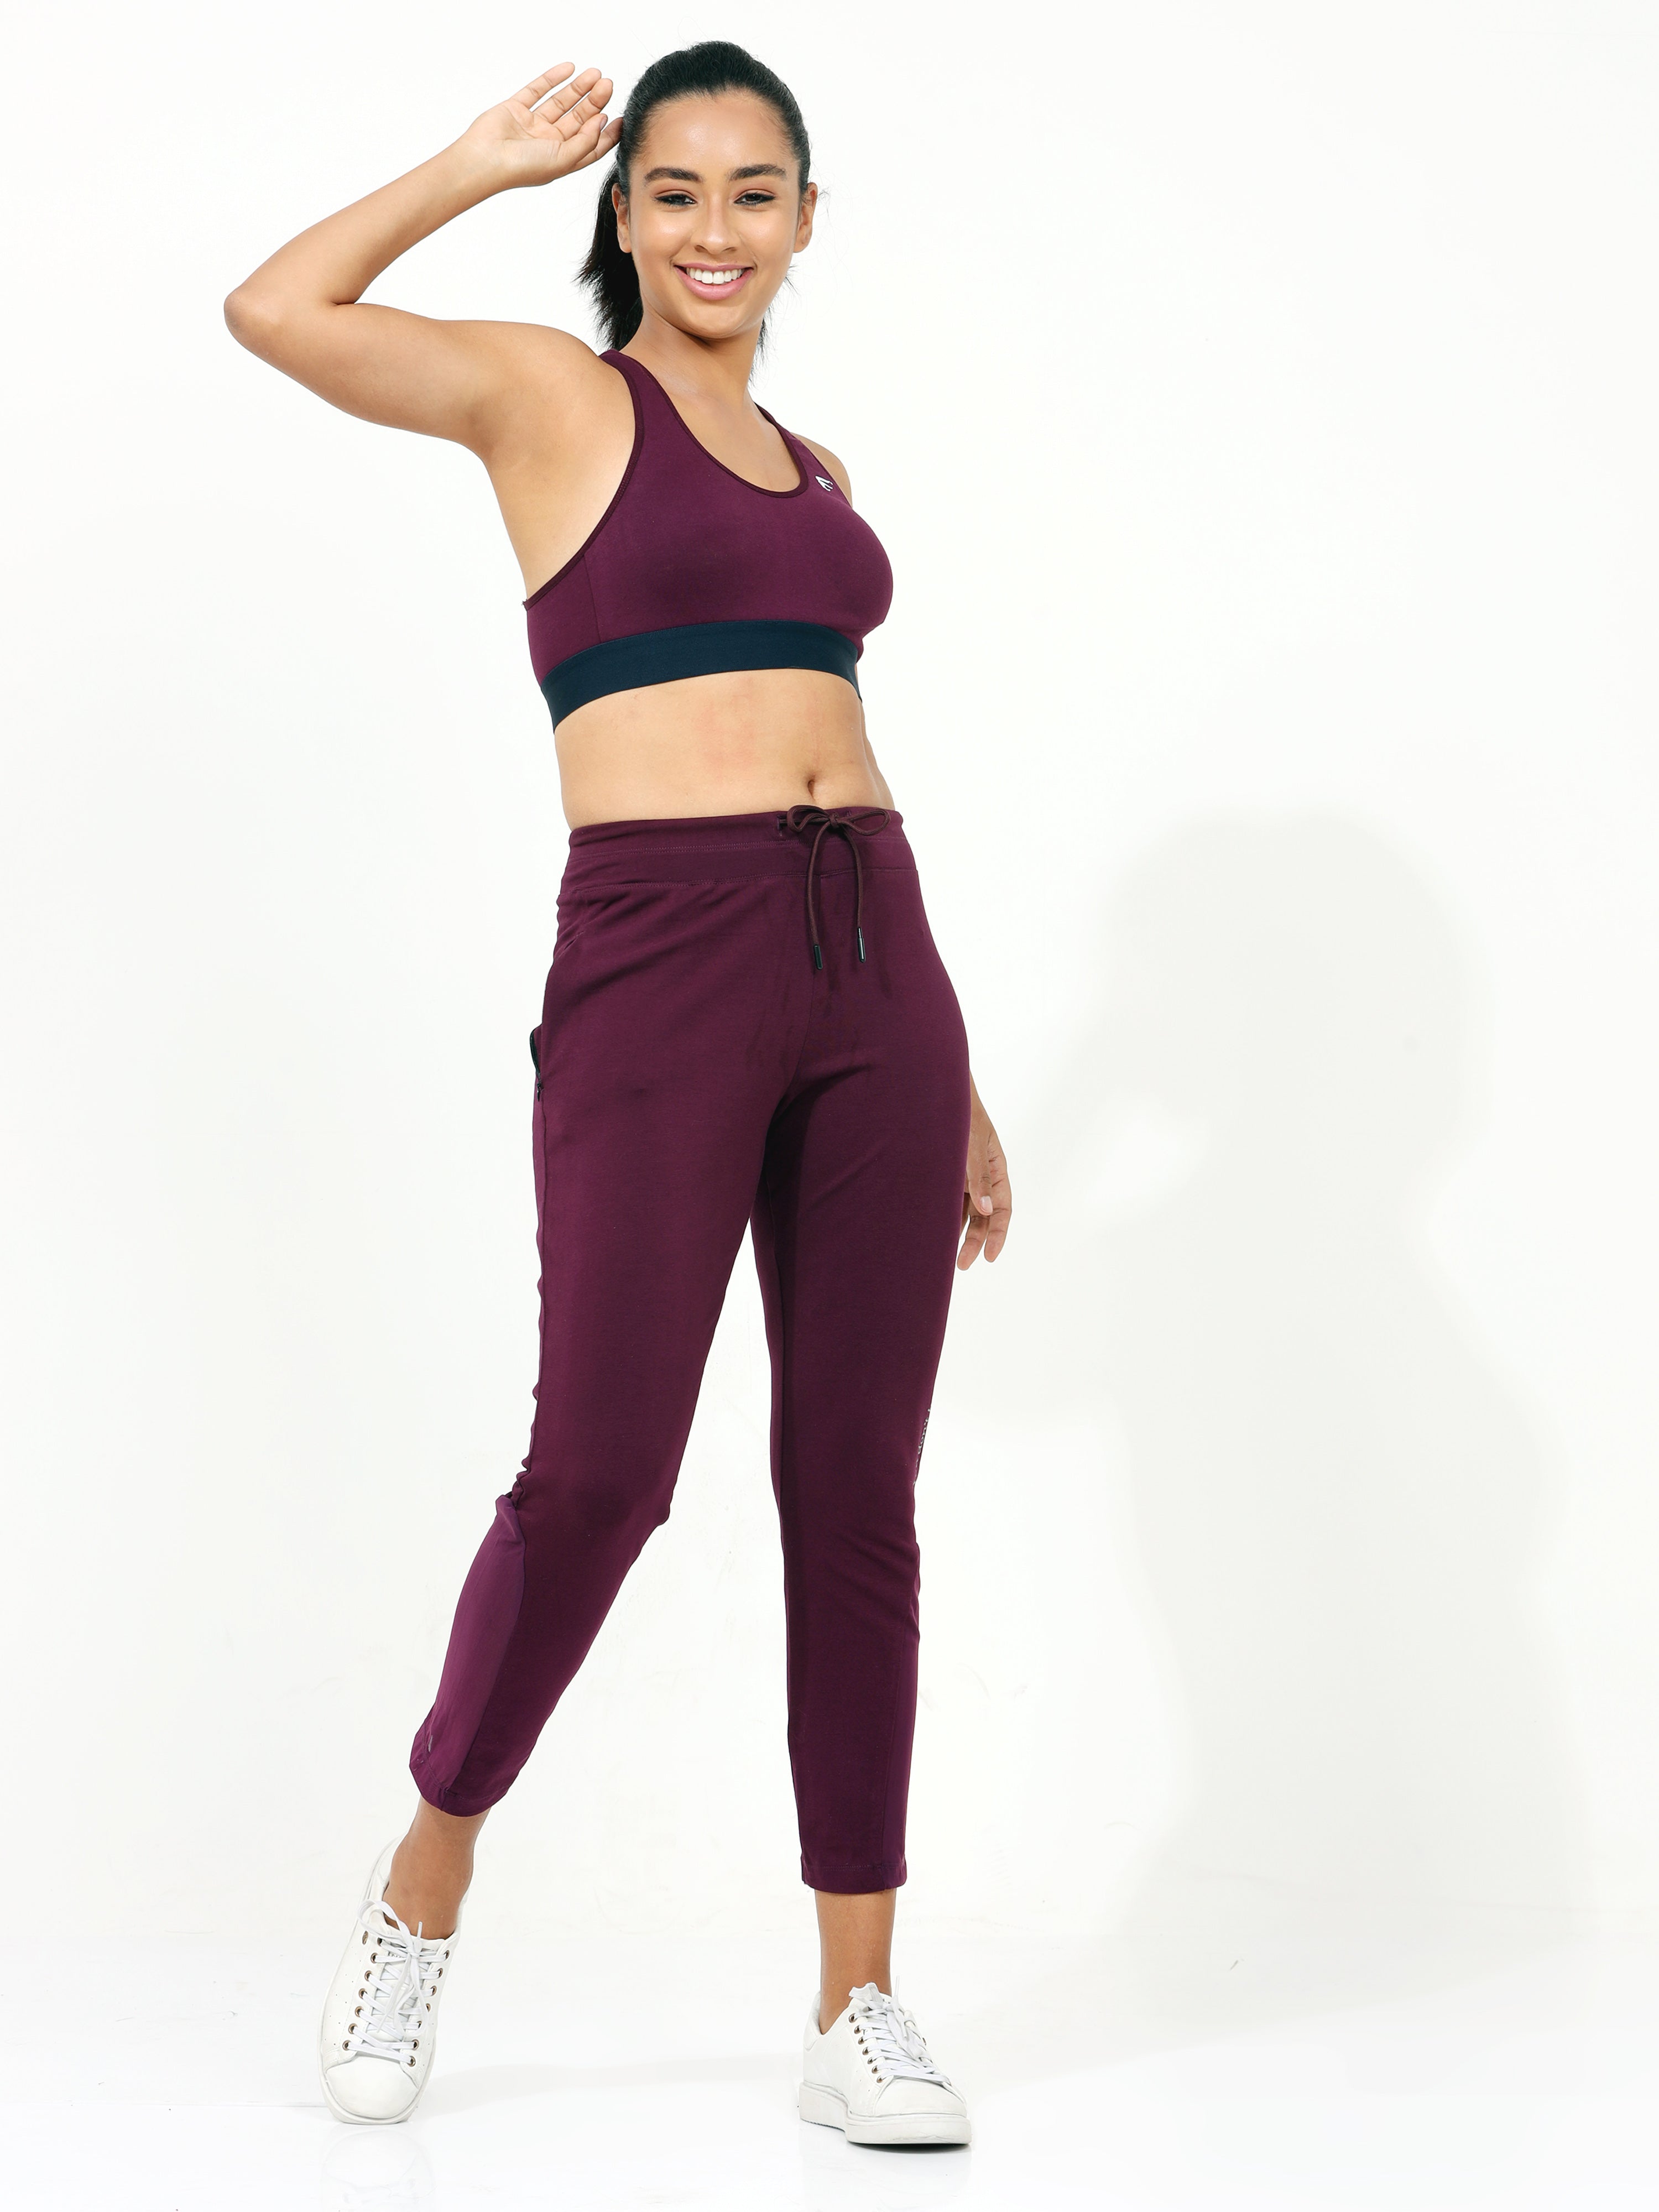 WOMEN'S TRACKSUIT FOR YOGA TRACK PANTS, GYM ACTIVE